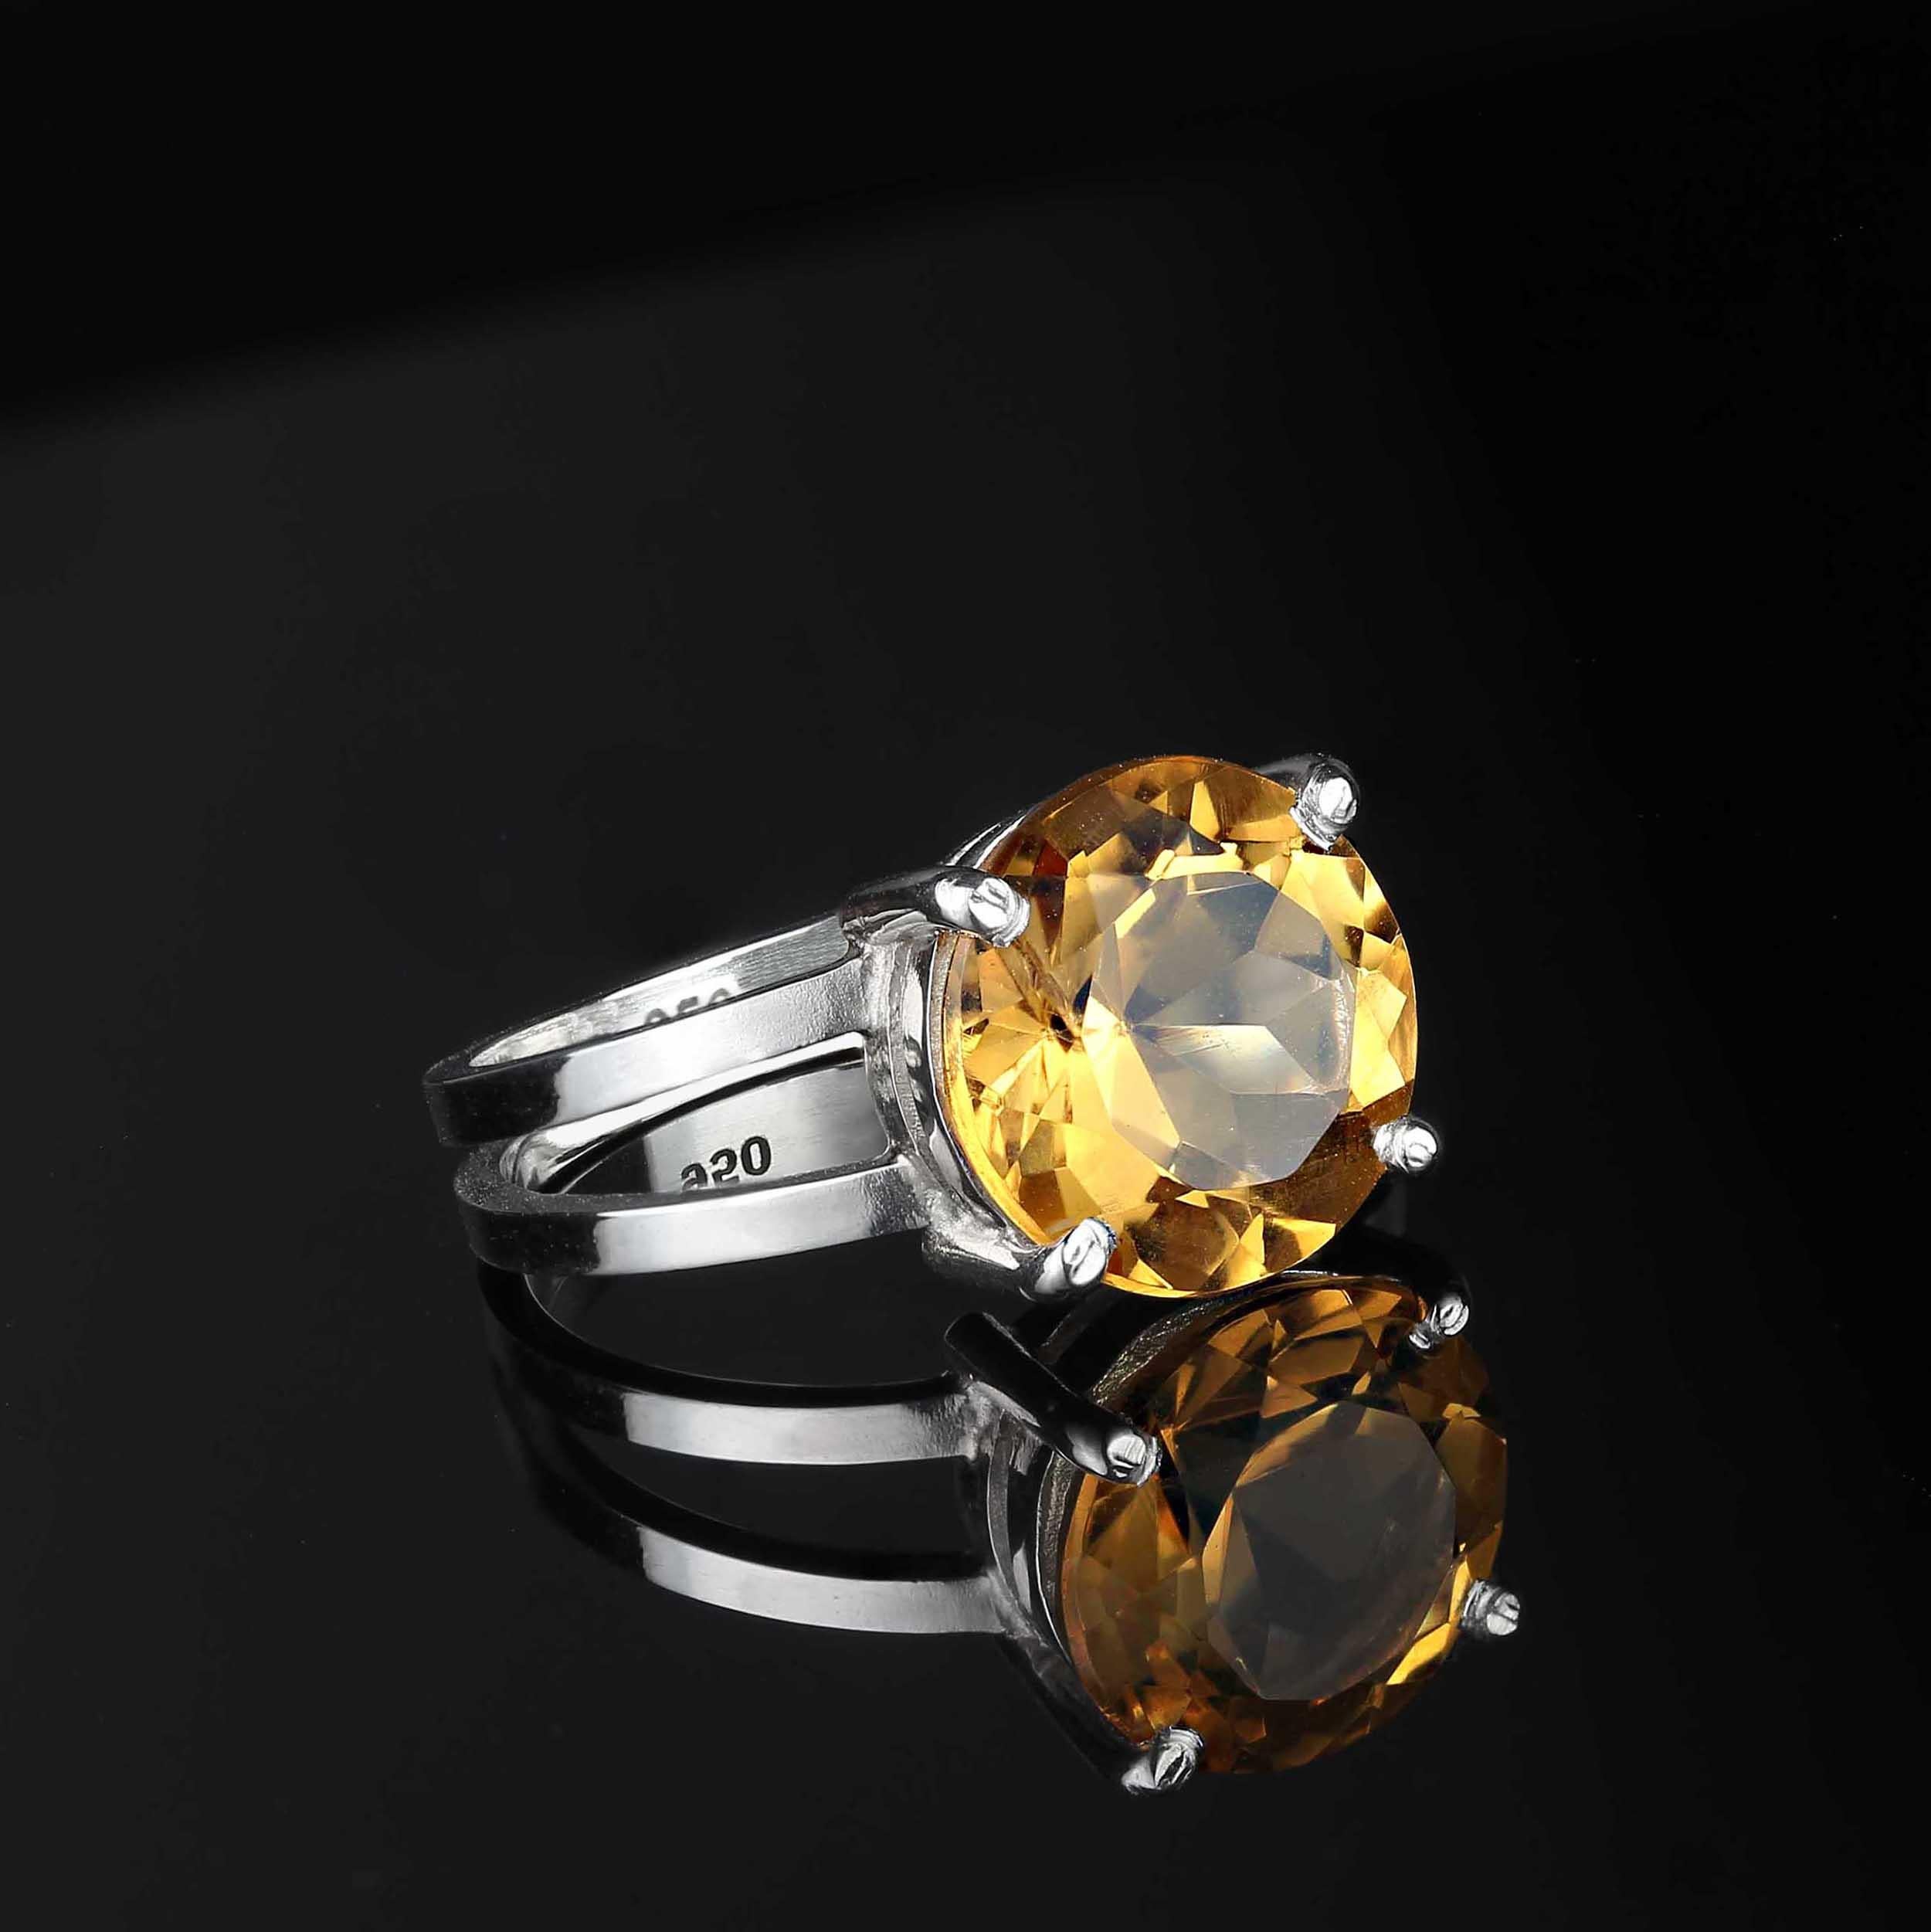 Artisan AJD Unusual Round 4.3 Carat Citrine in Sterling Silver Ring